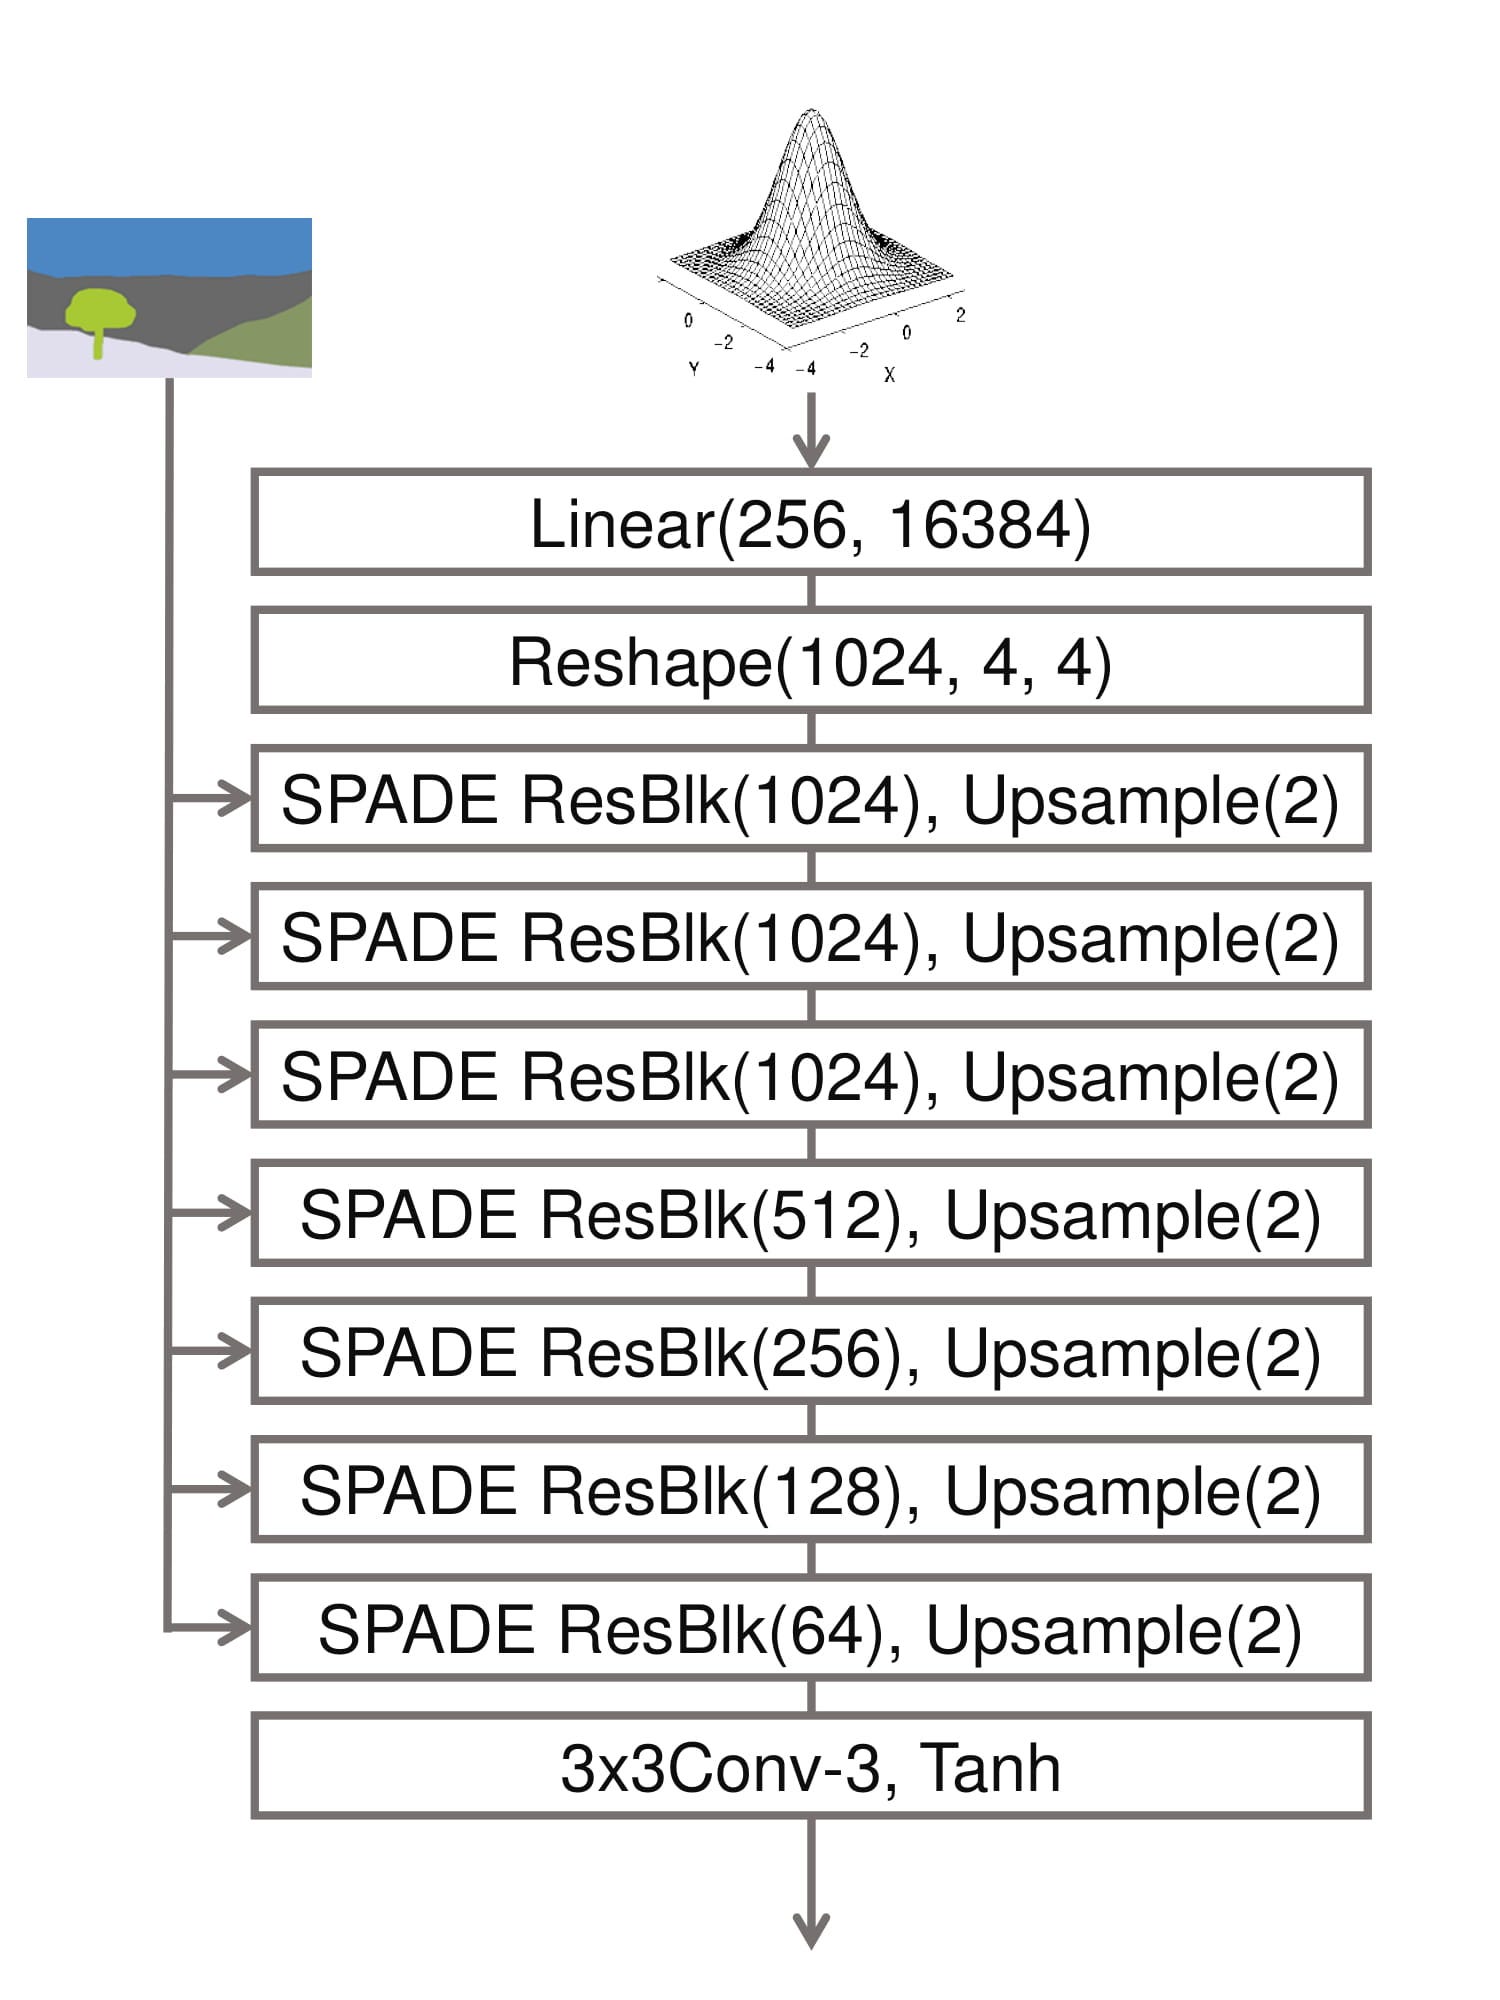 SPADE: State of the art in Image-to-Image Translation by Nvidia